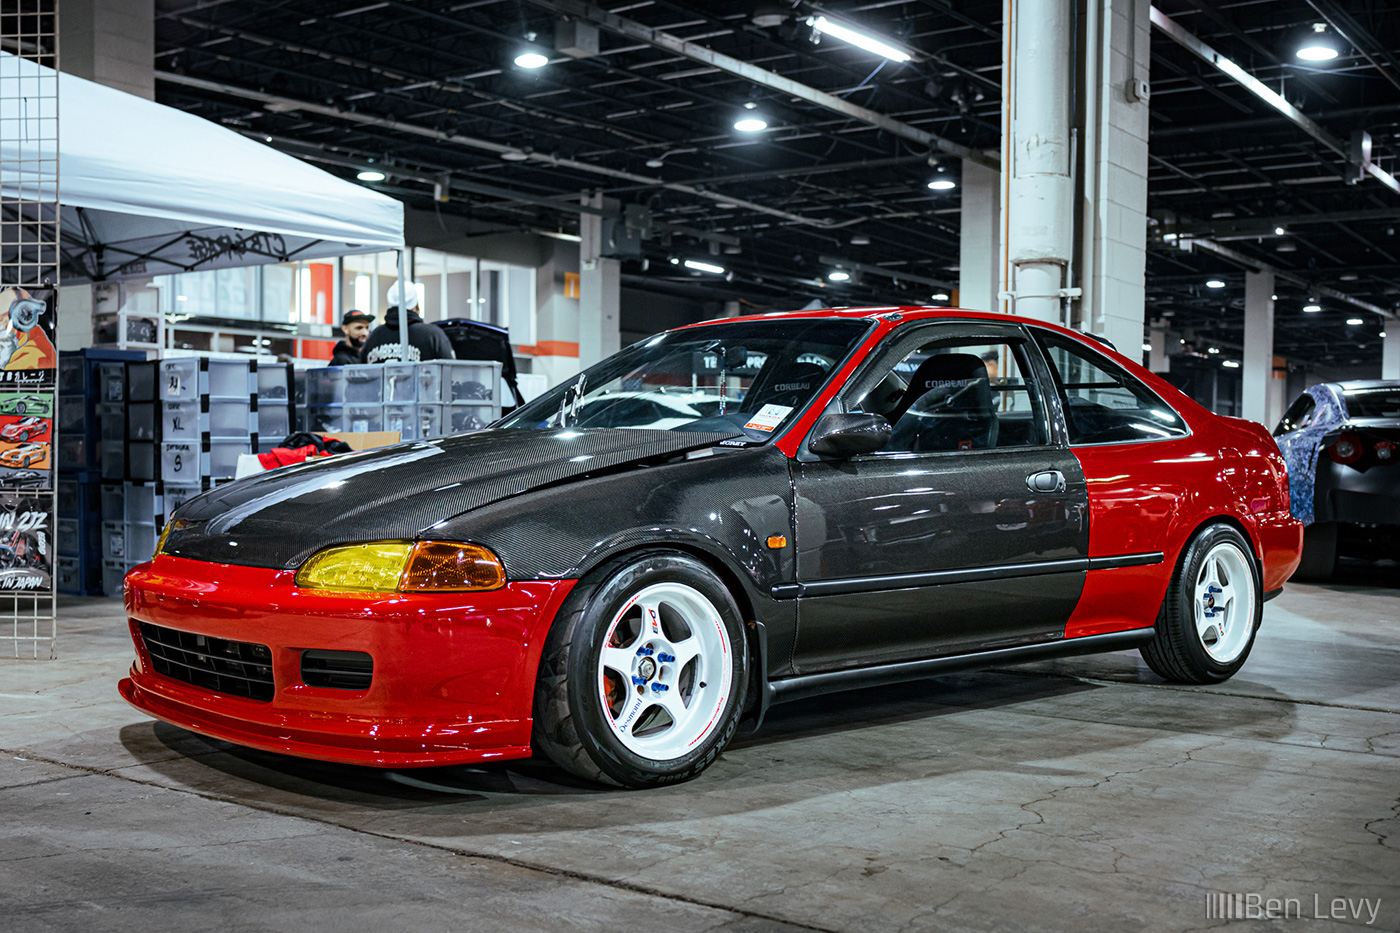 Red Honda Civic Coupe with Carbon Fiber Fenders and Doors